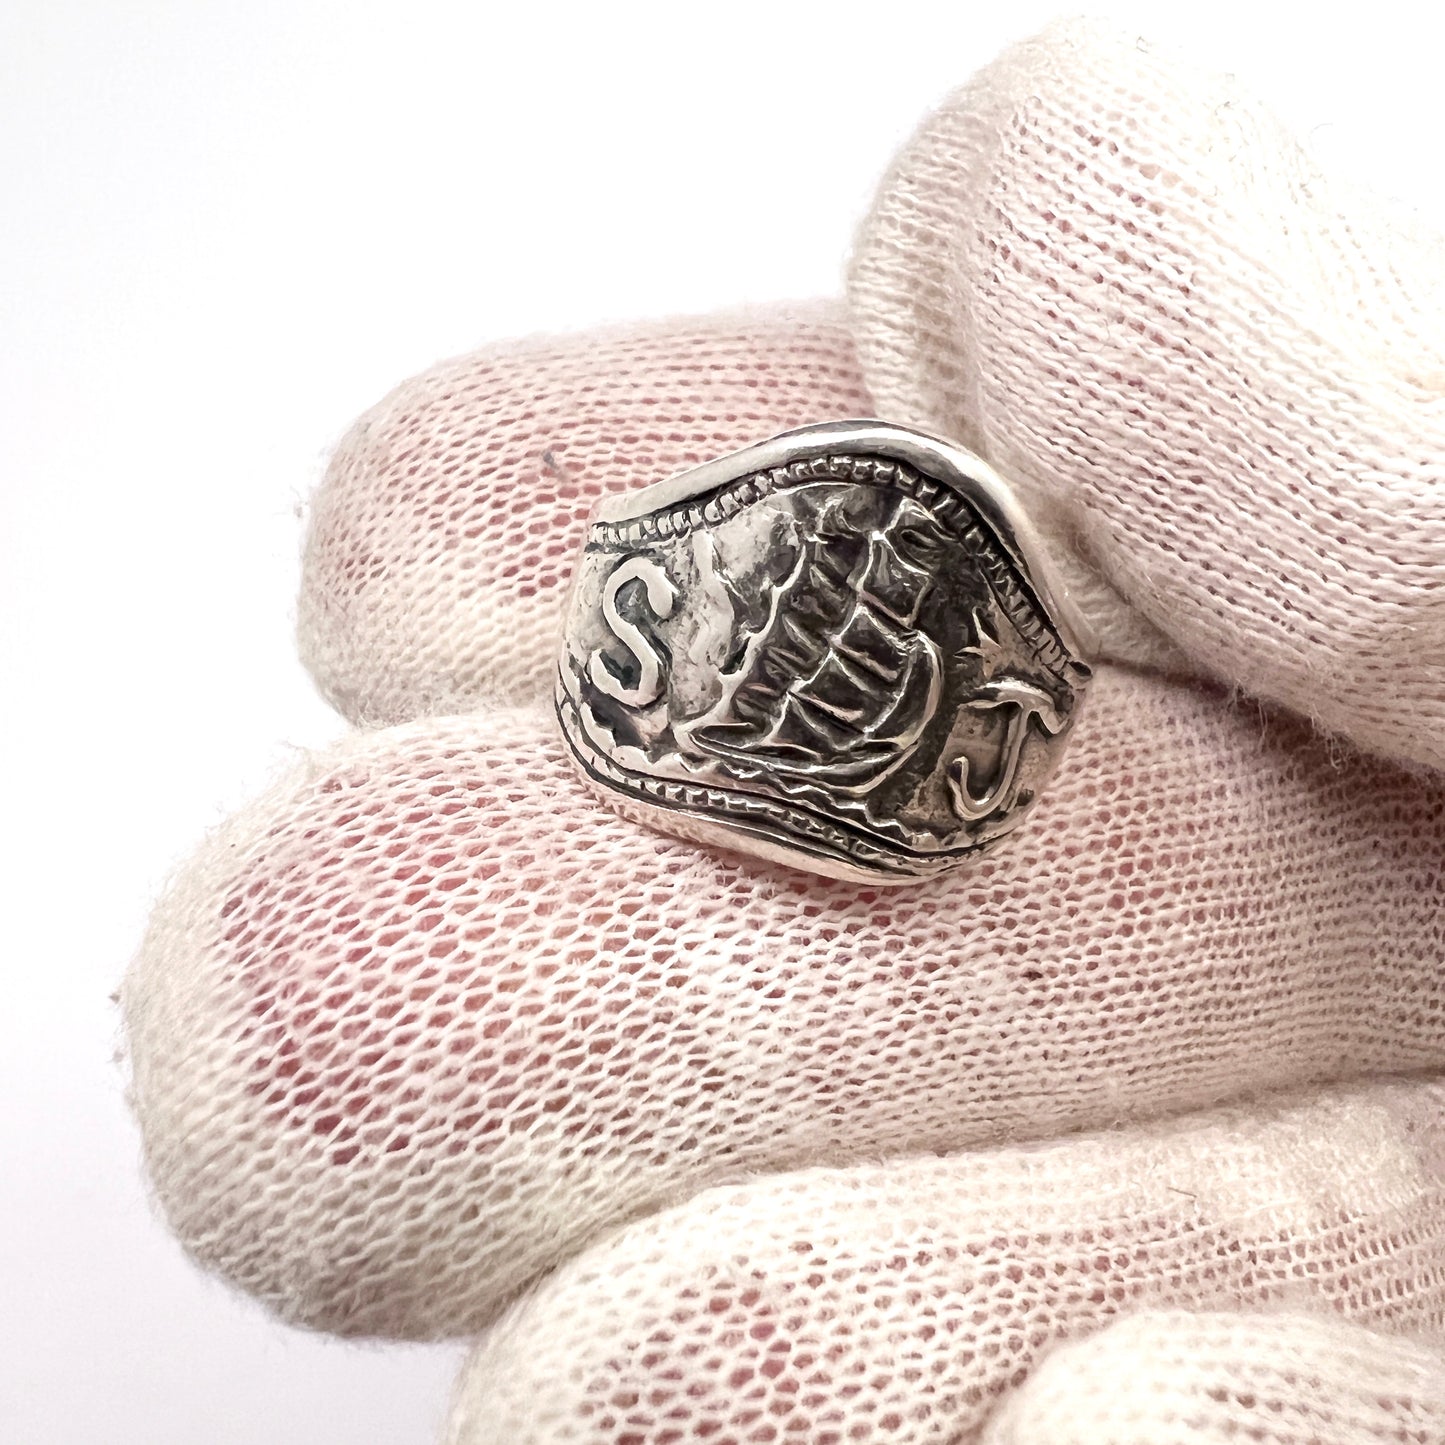 Antique c year 1900. Sterling Silver Novelty Ring.